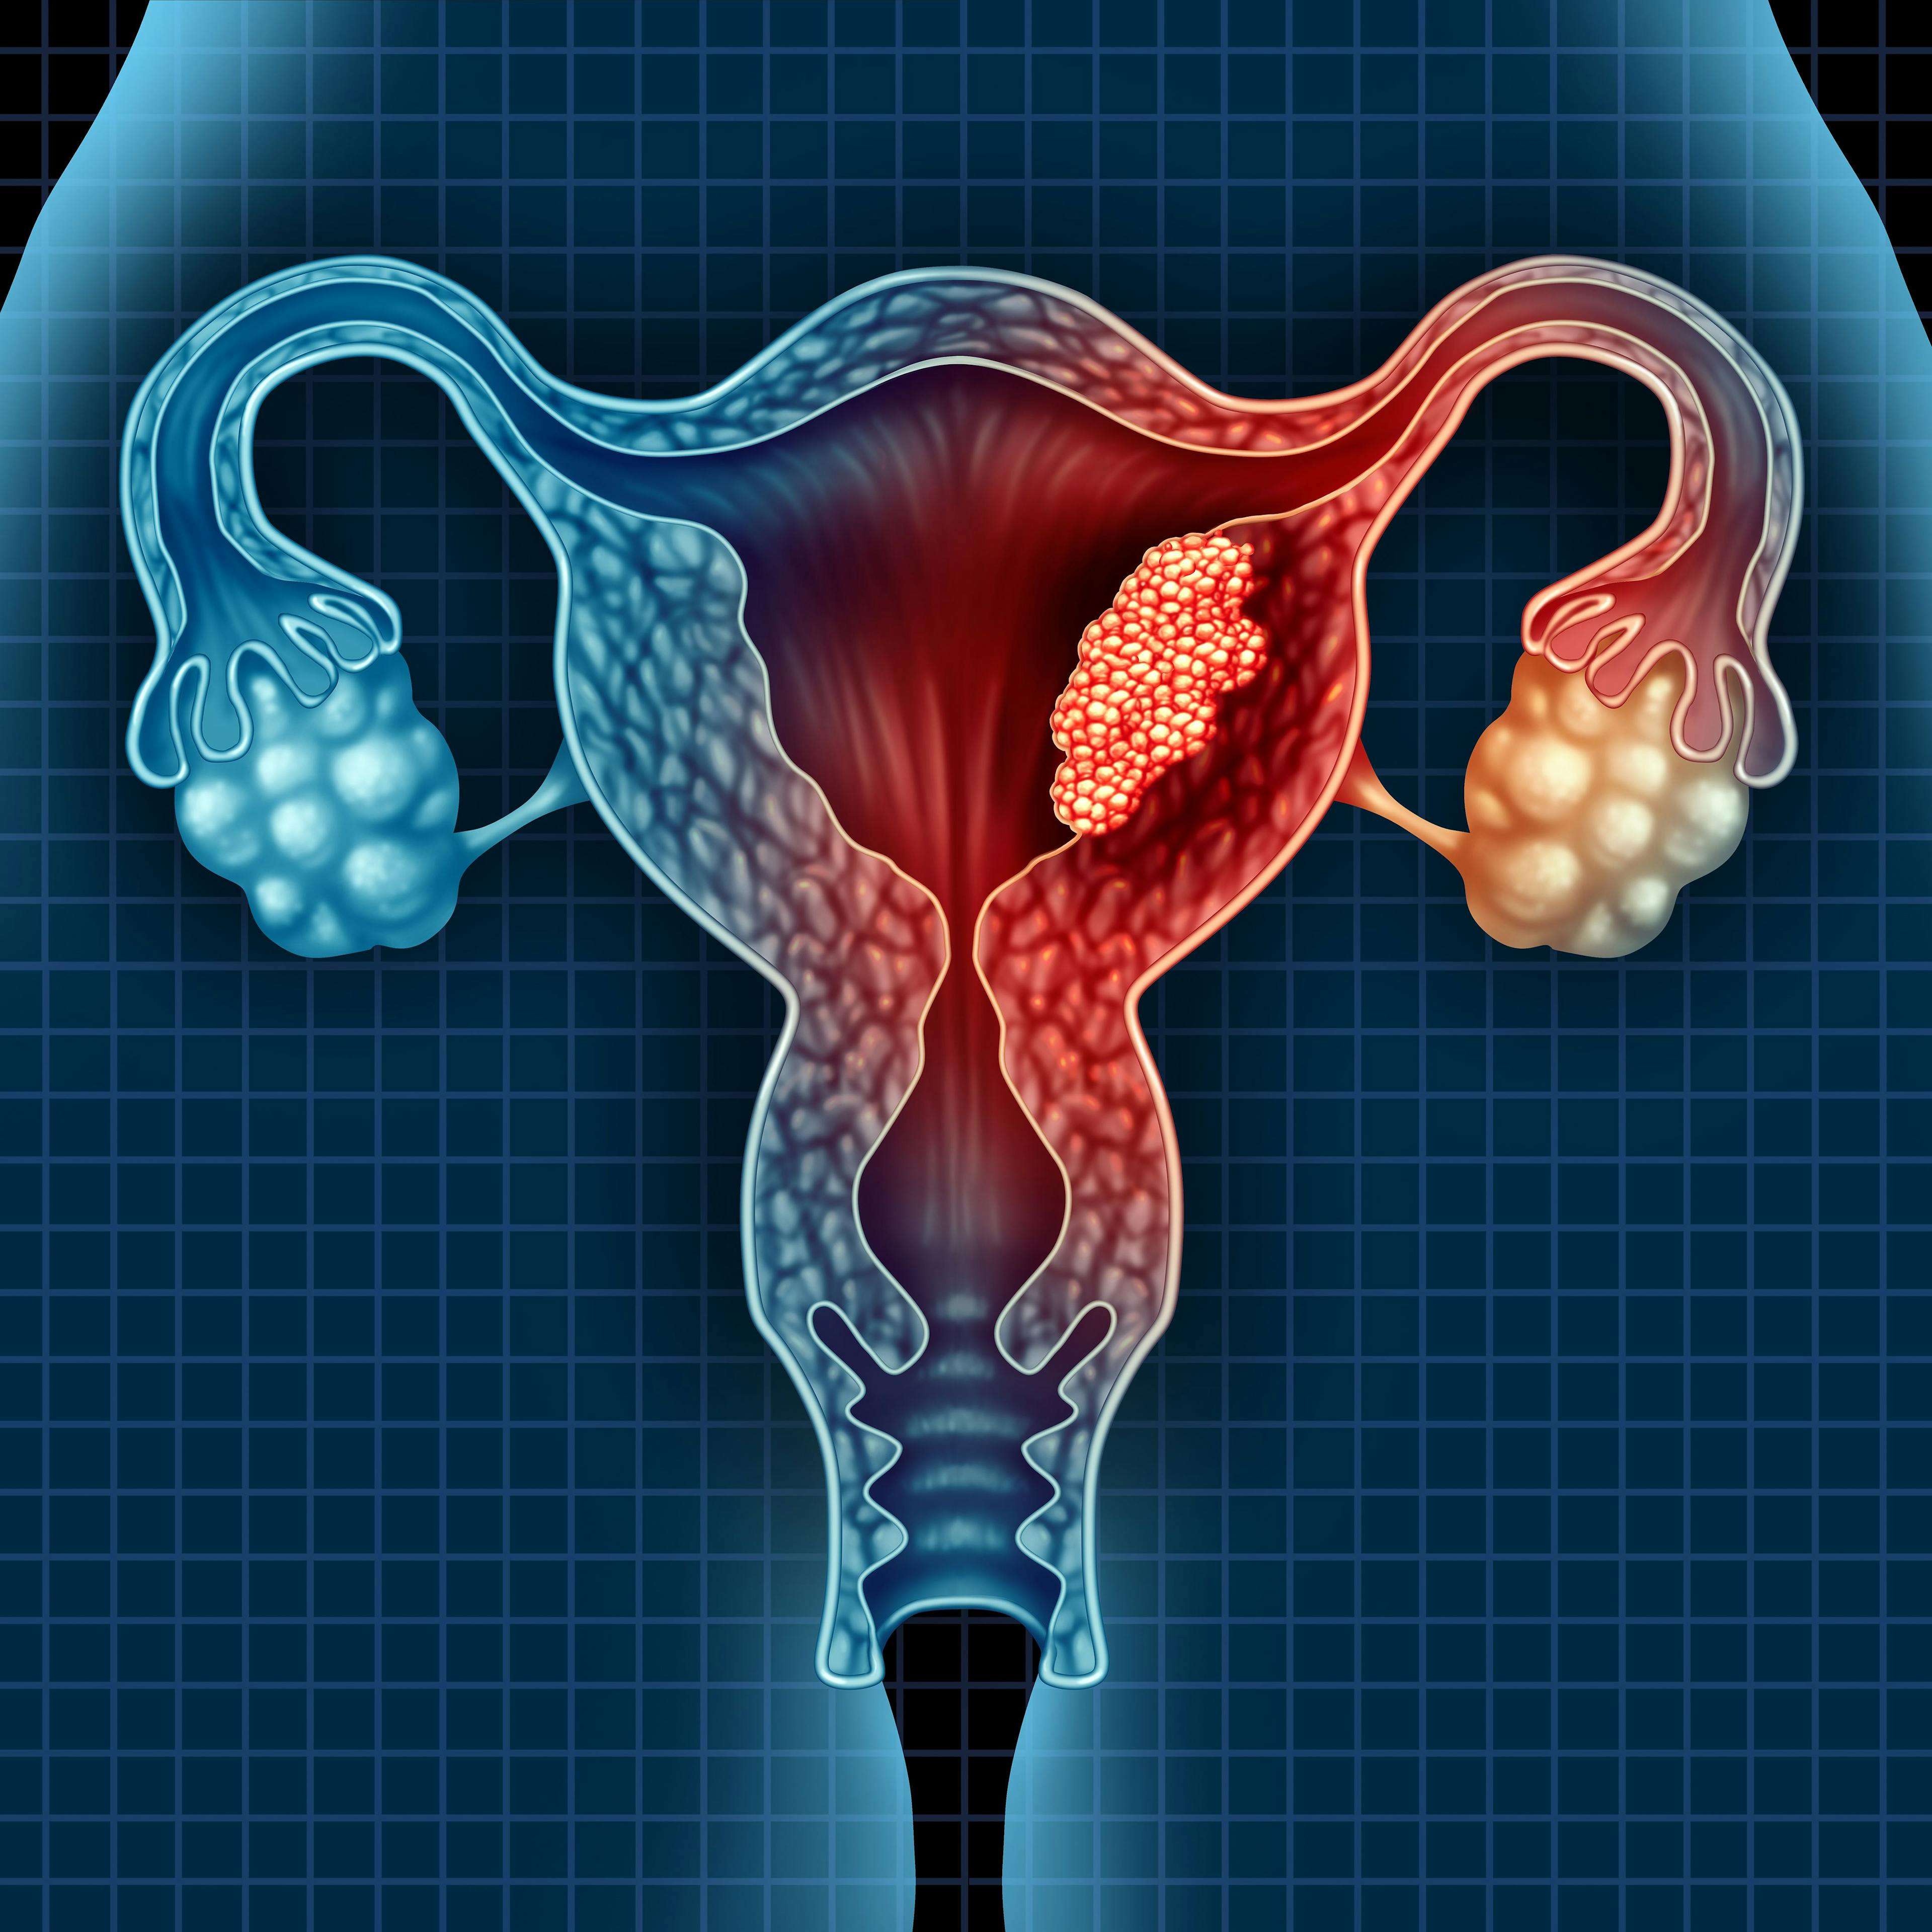 Several immune-related long noncoding RNA signatures—including PCAT19 and SCARNA9—may be associated with prognosis in patients with endometrial cancer, according to the new research.Several immune-related long noncoding RNA signatures—including PCAT19 and SCARNA9—may be associated with prognosis in patients with endometrial cancer, according to the new research.